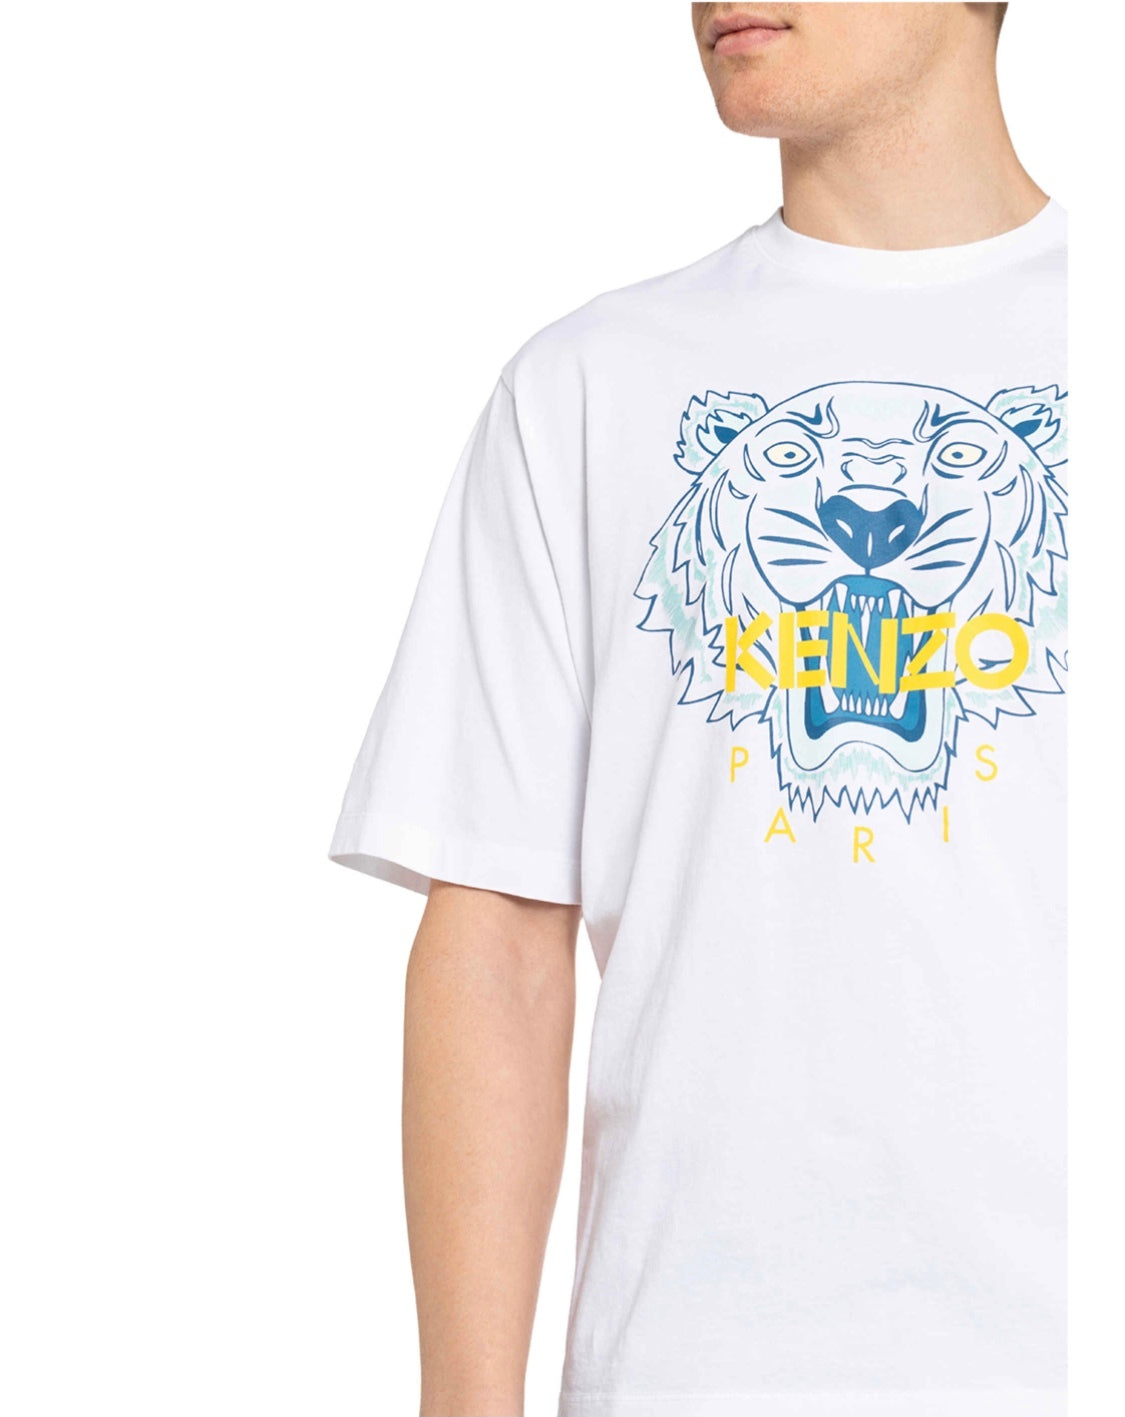 Kenzo Blue Tiger Logo T-Shirt - Shop Streetwear, Sneakers, Slippers and Gifts online | Malaysia - The Factory KL